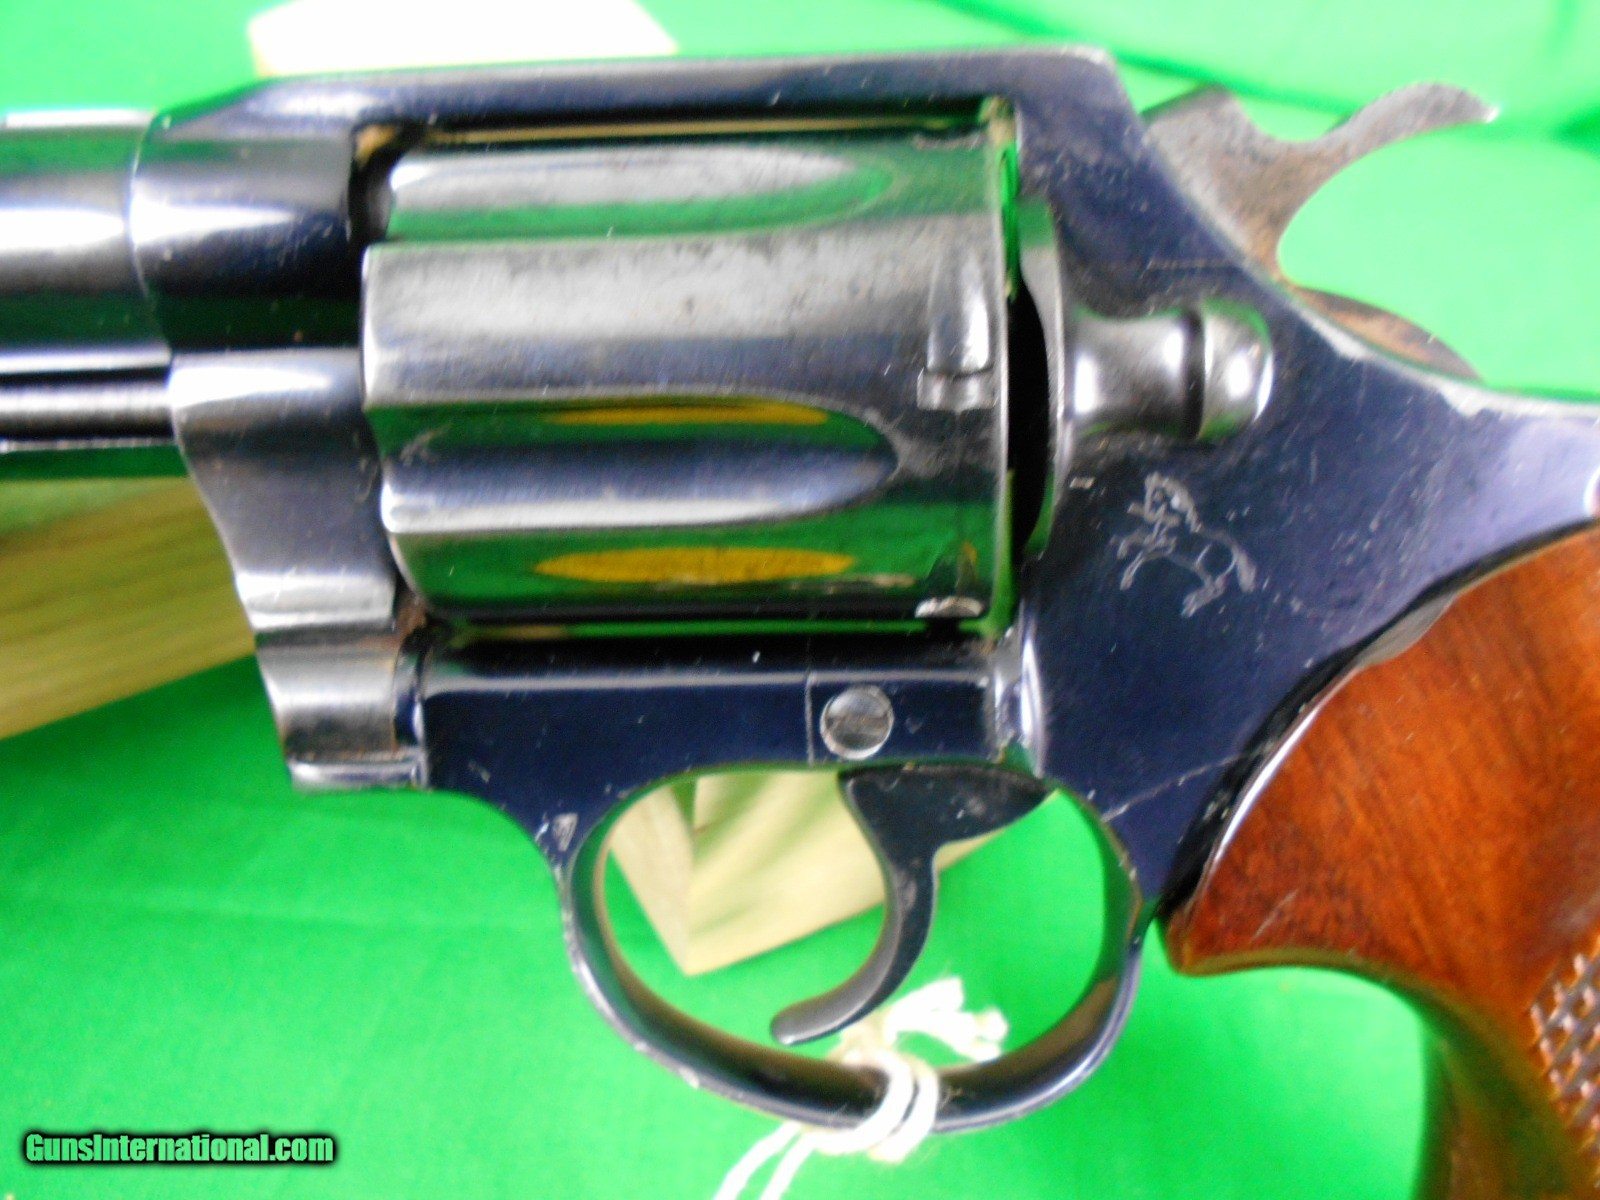 Colt Viper in 38 special with factory box and paperwork - made in 1977